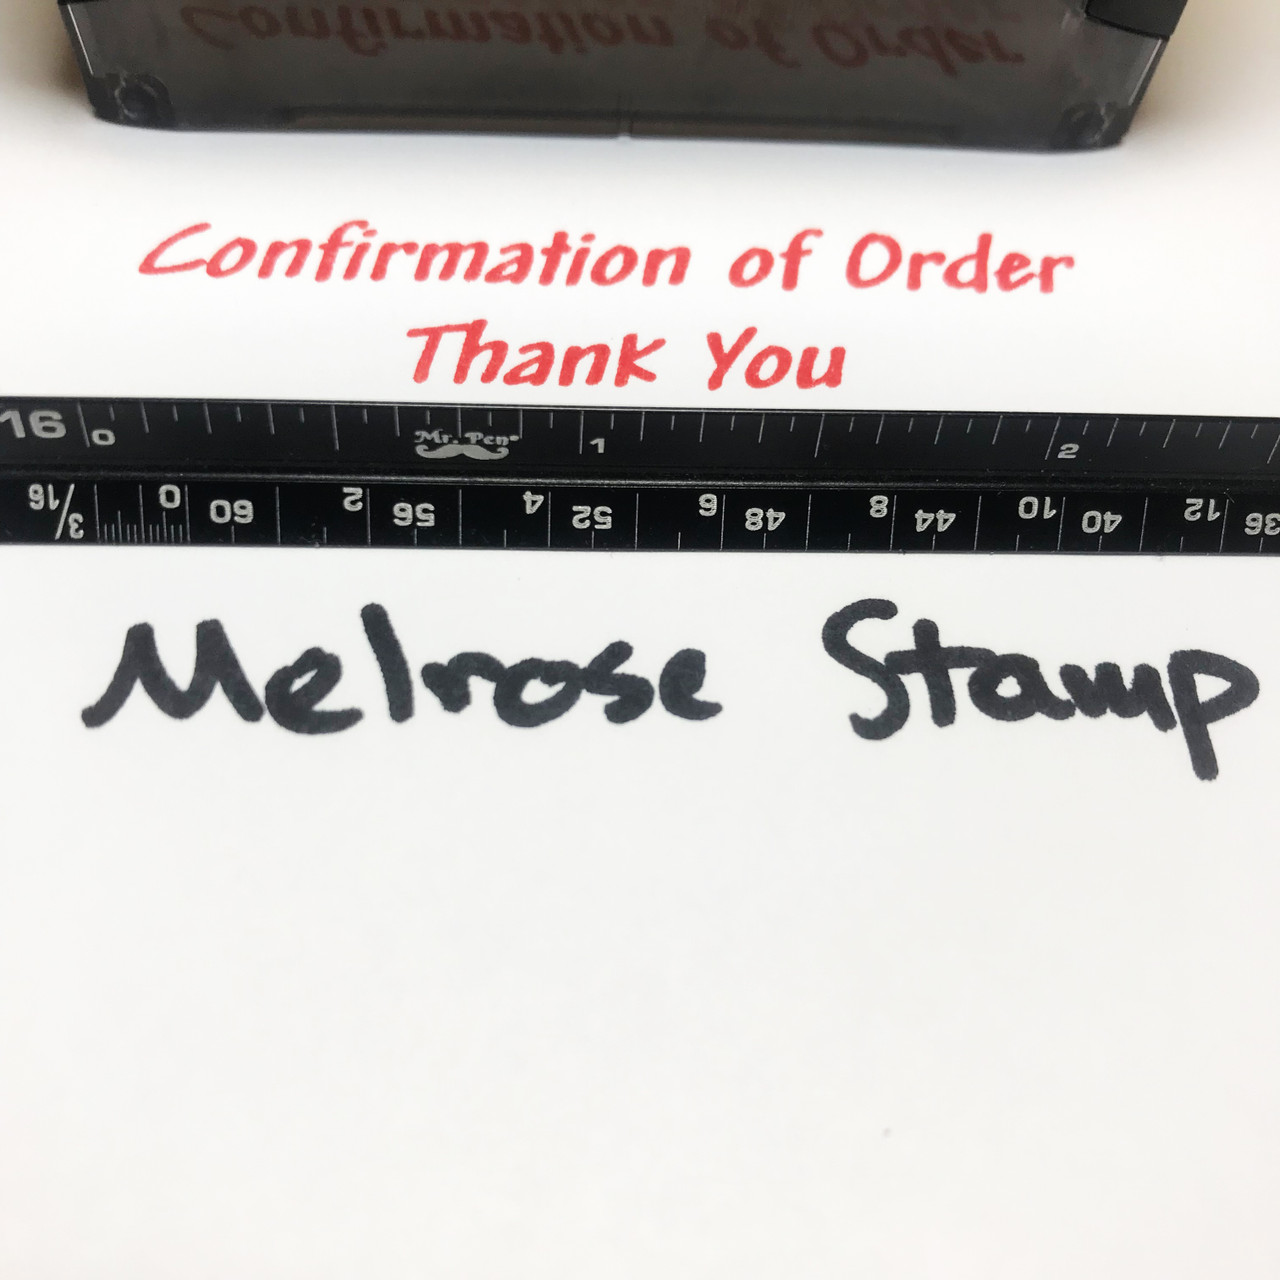 CONFIRMATION OF ORDER THANK YOU Rubber Stamp for office use self